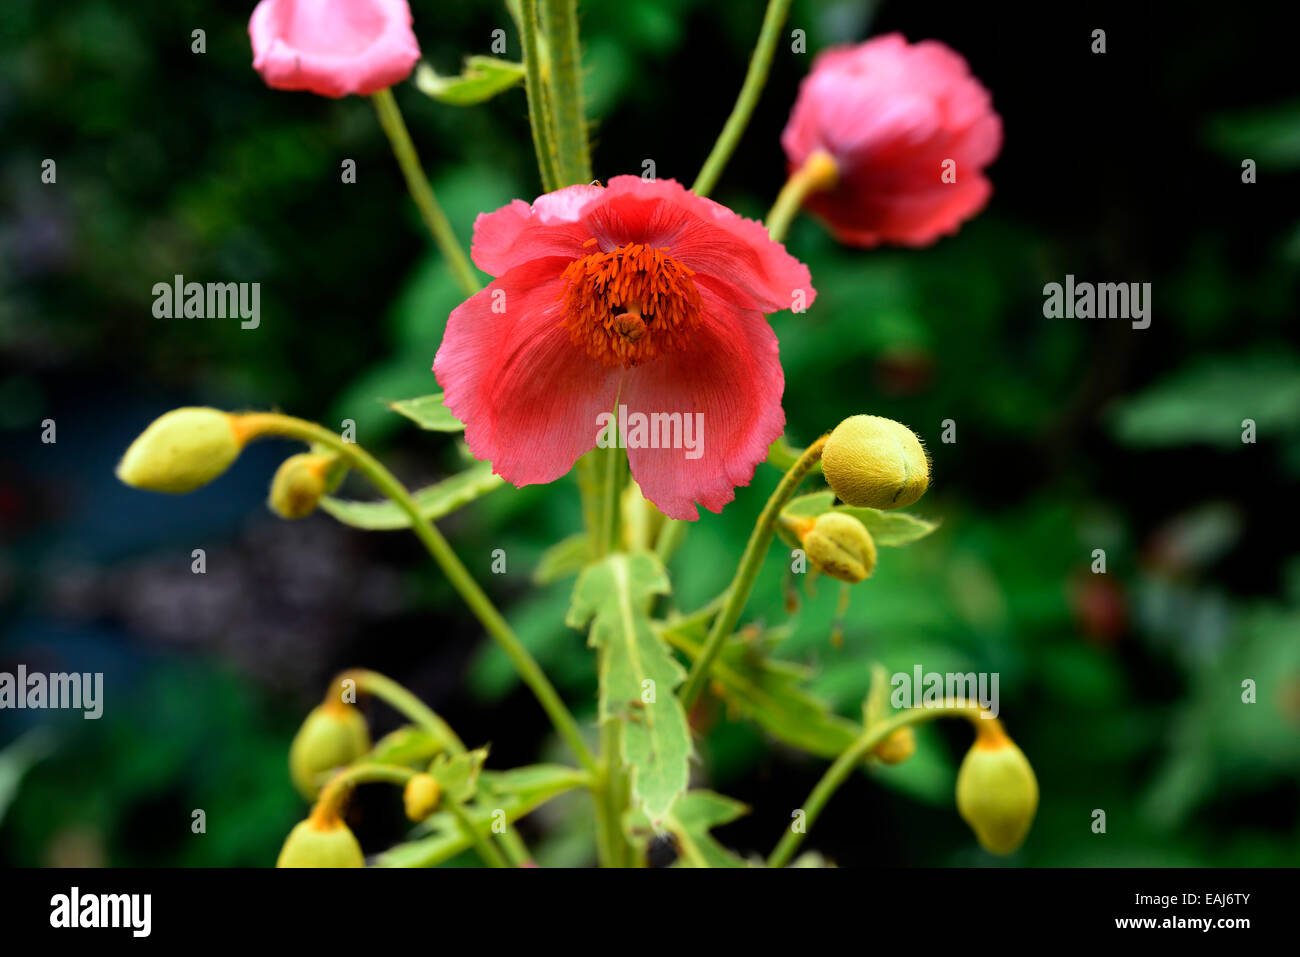 Meconopsis Napaulensis red poppy biennial Nepalese nepal Himalayan poppies flower flowers RM Floral Stock Photo